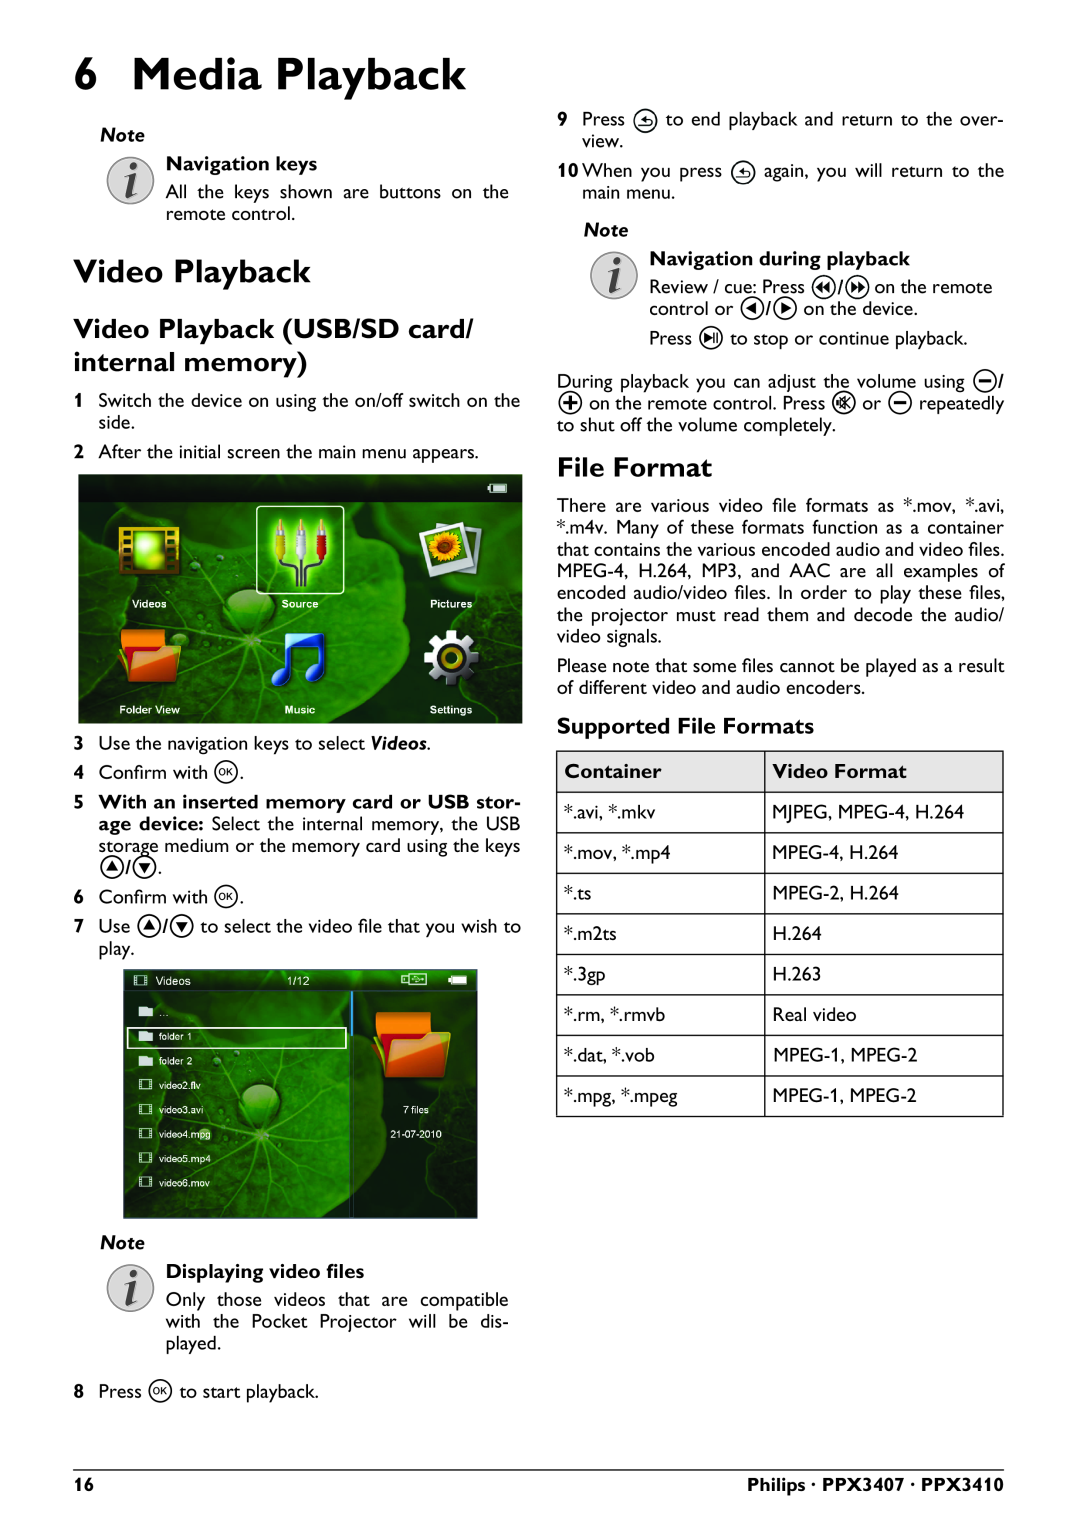 Philips PPX3407 Media Playback, Video Playback USB/SD card/ internal memory, Supported File Formats, Container 